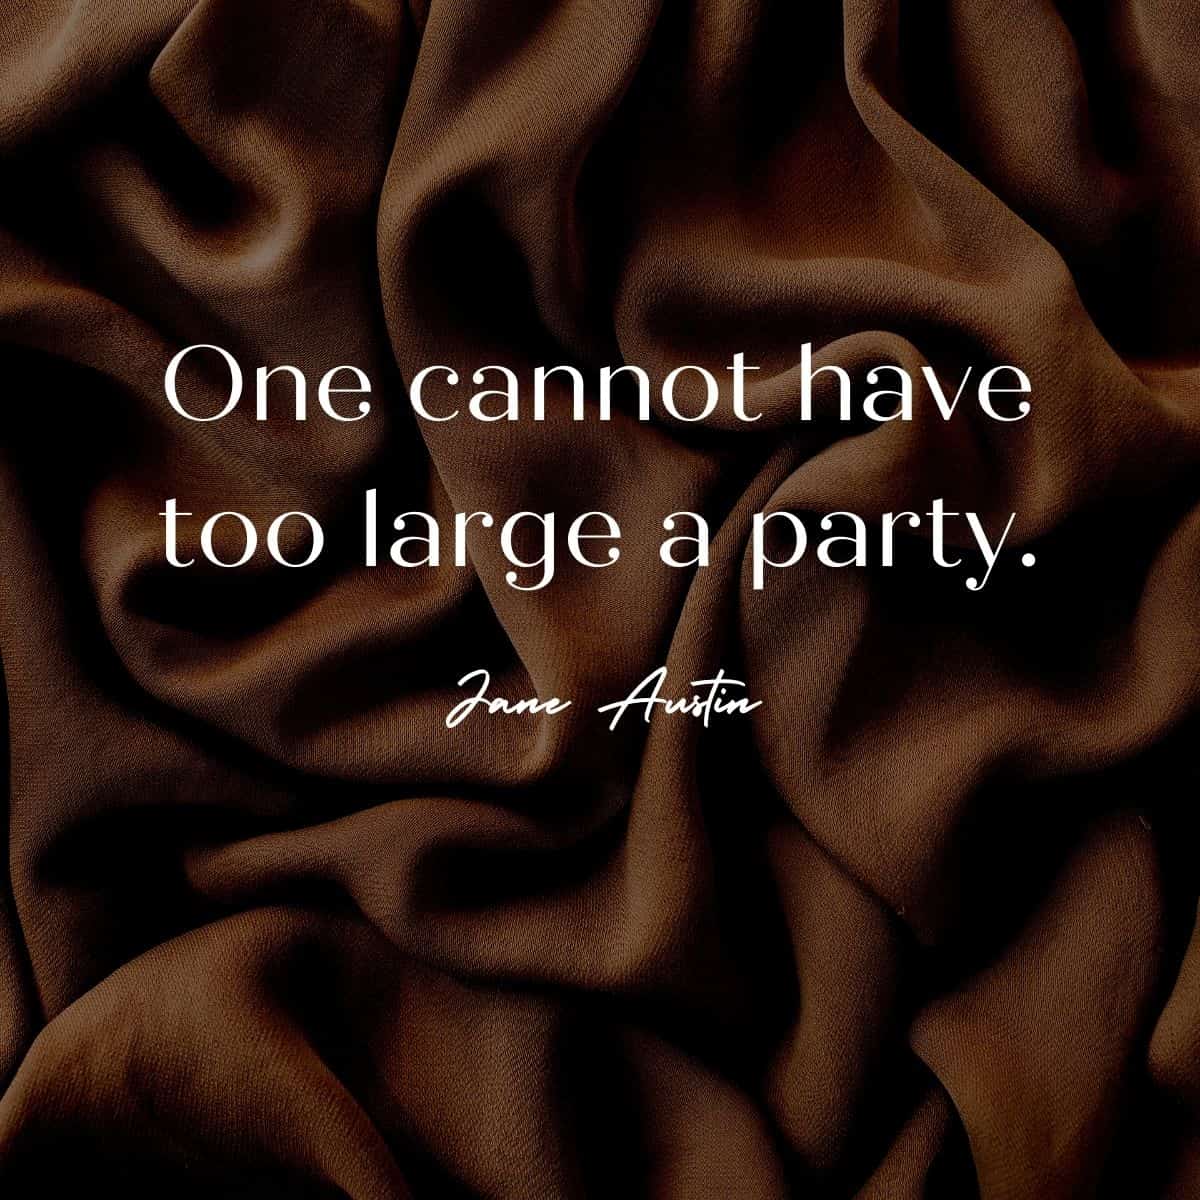 “One cannot have too large a party.” – Jane Austen